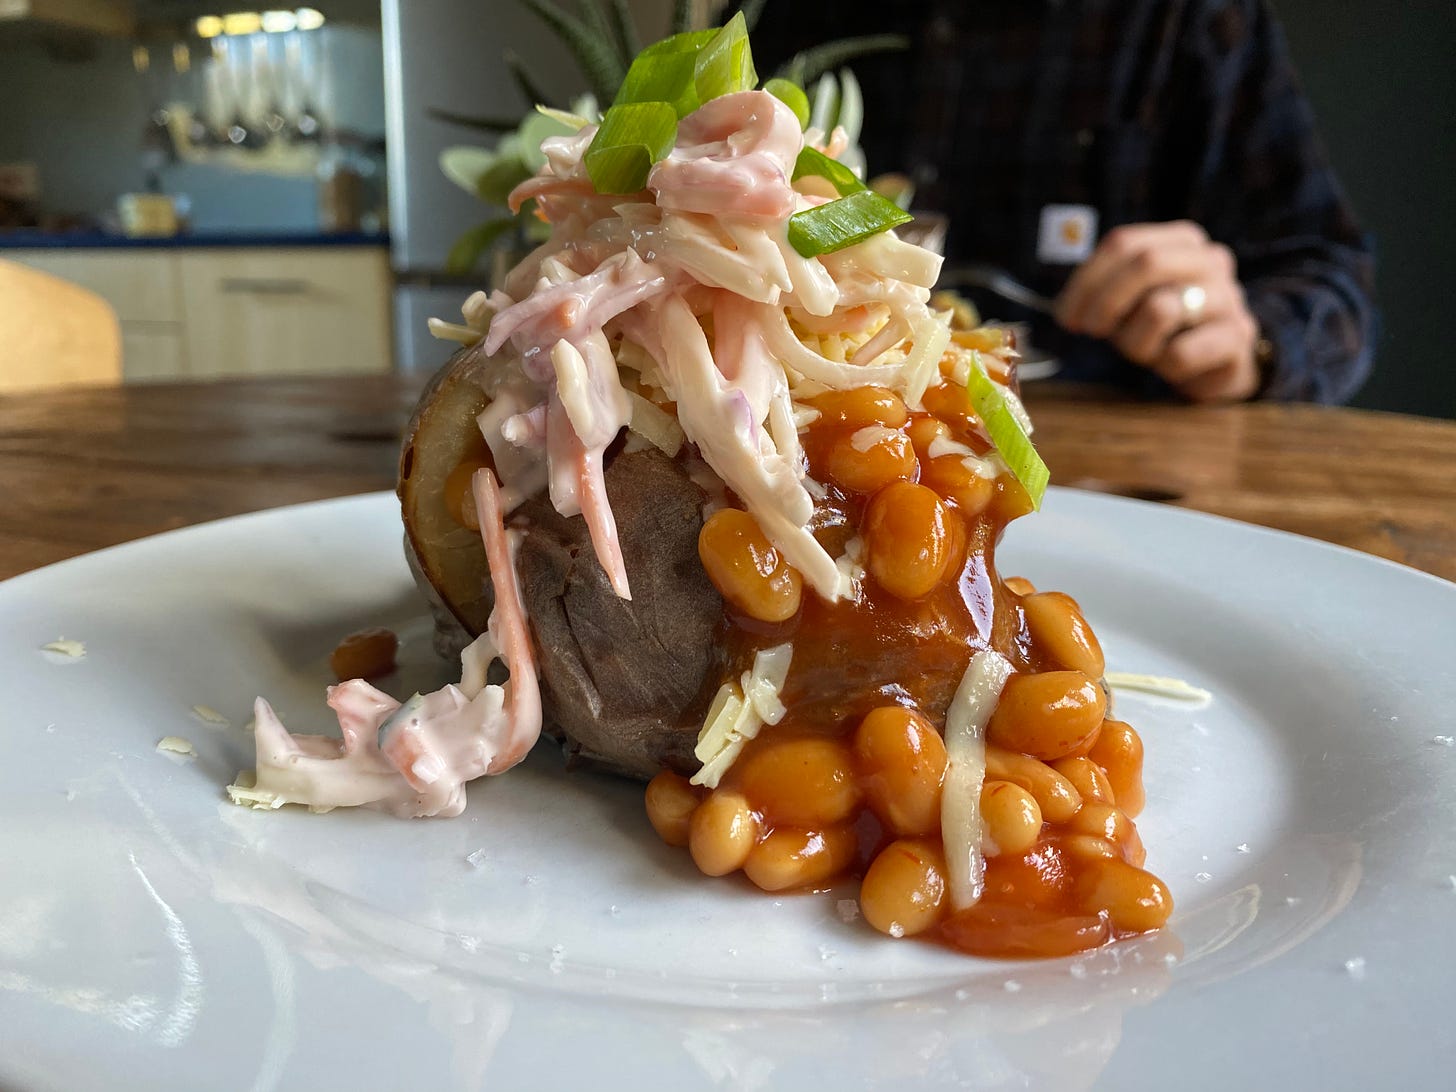 Jacket potato with beans, coleslaw and spring onion on a white plate. 